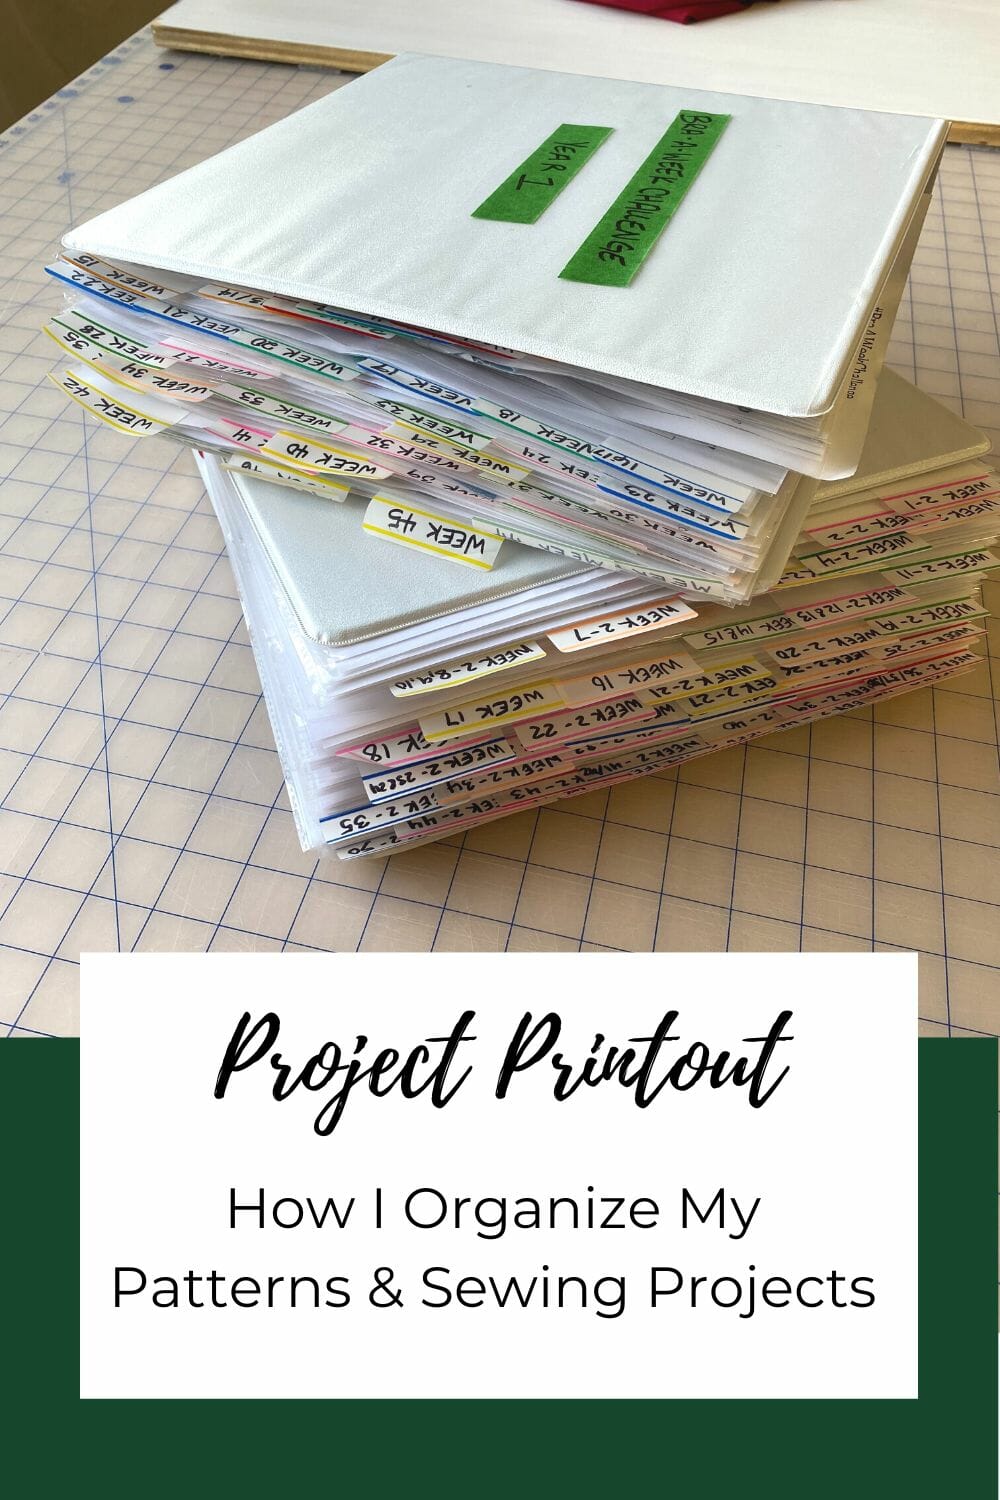 How I Organize My Patterns & Sewing Projects